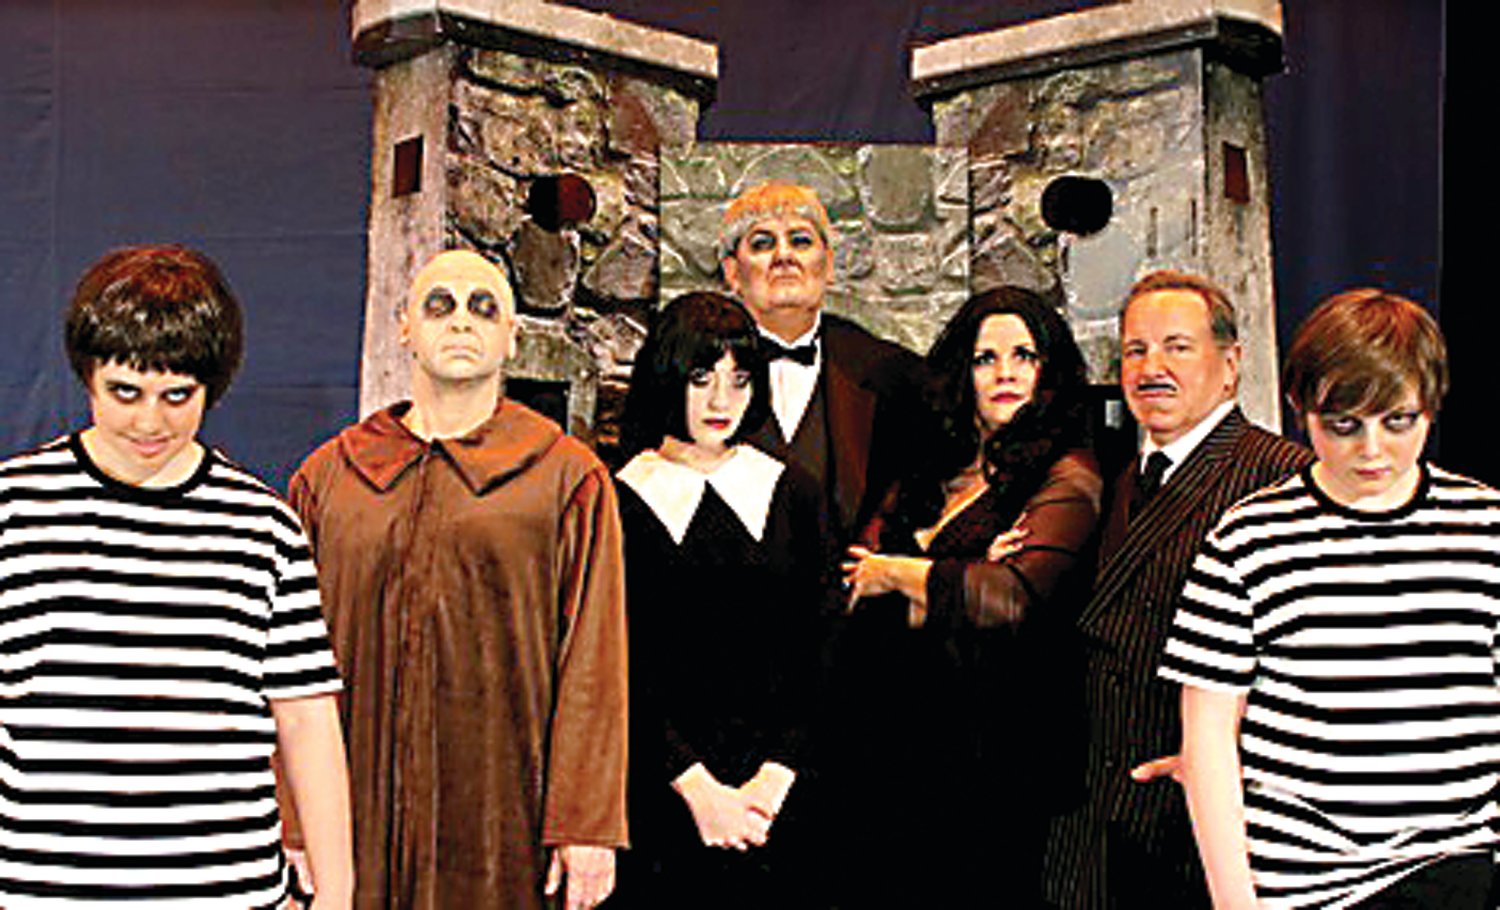 The cast members of Neshaminy Valley Music Theatre’s production of “The Addams Family” are, from left, Lucy Allen of Bensalem as Pugsley, Greg Kopcho of Bensalem as Fester, Marissa Miller of Carversville as Wednesday, Joe Harris of Trevose as Lurch, Courtney Capriotti of Levittown as Morticia, Jack Sariego of Jenkintown as Gomez, and Aiden Barrie of Newtown, also as Pugsley (Barrie and Allen will rotate in the role).